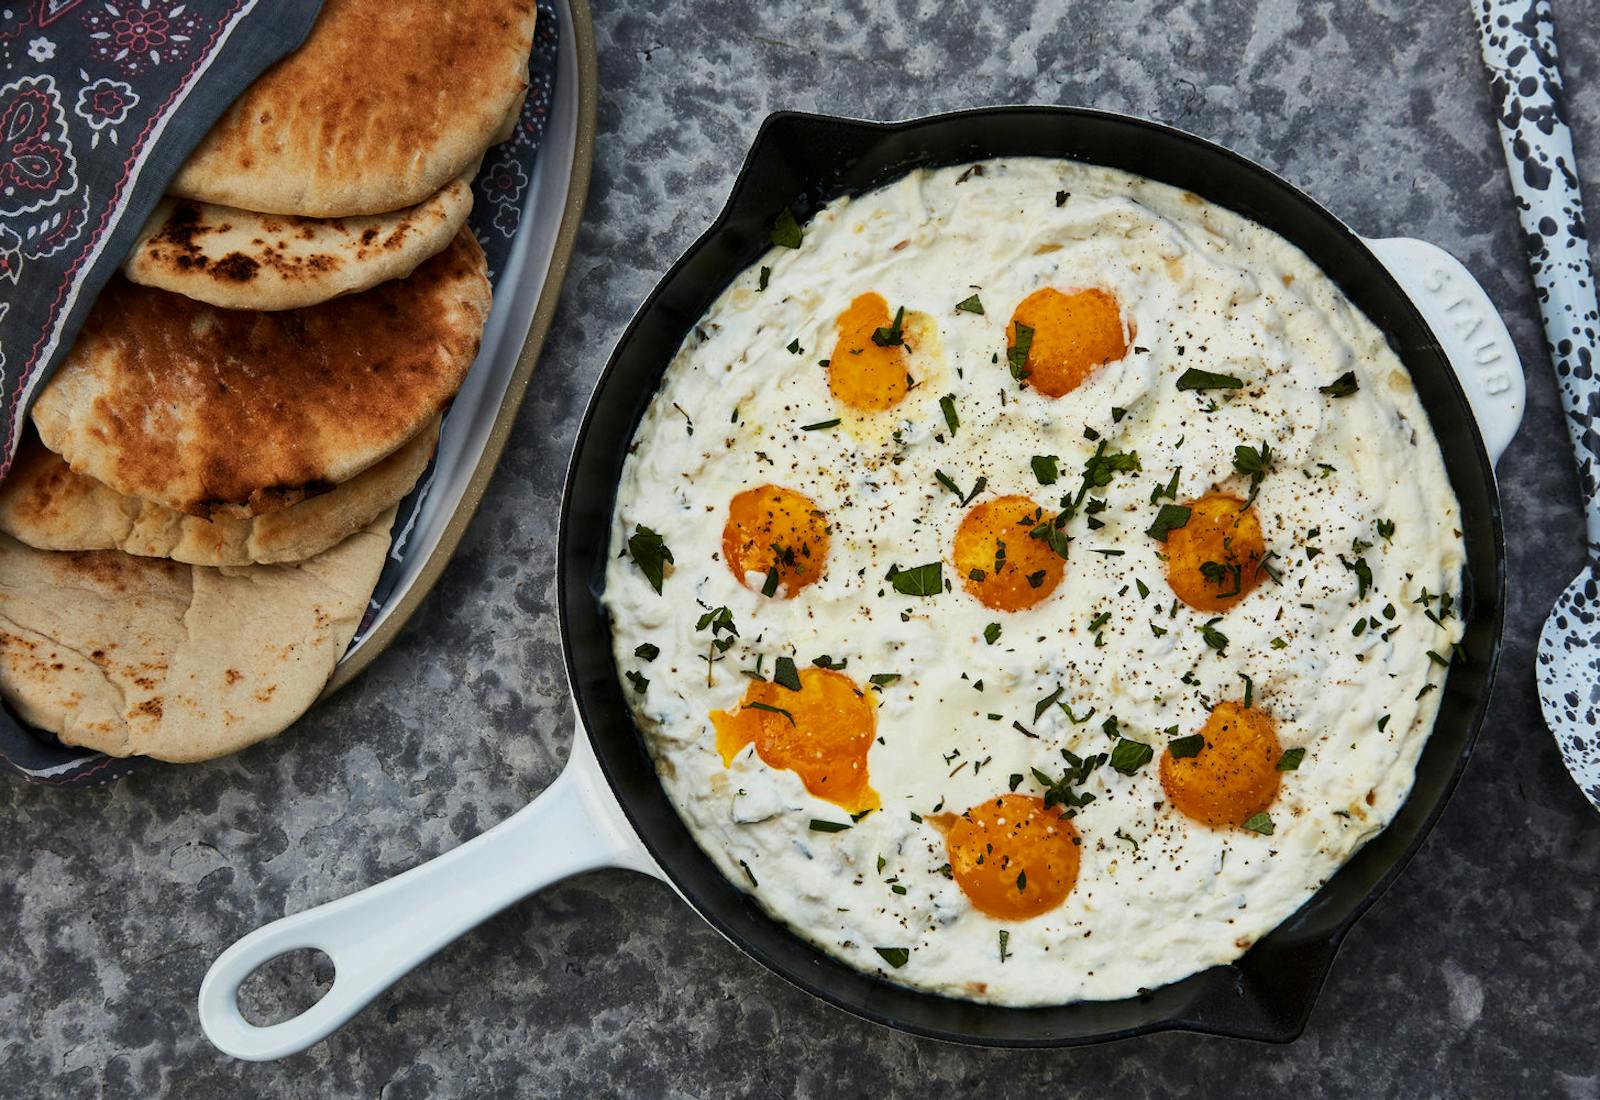 White shakshuka with labneh in cast iron skilled alongside fresh pita, atop speckled grey surface.